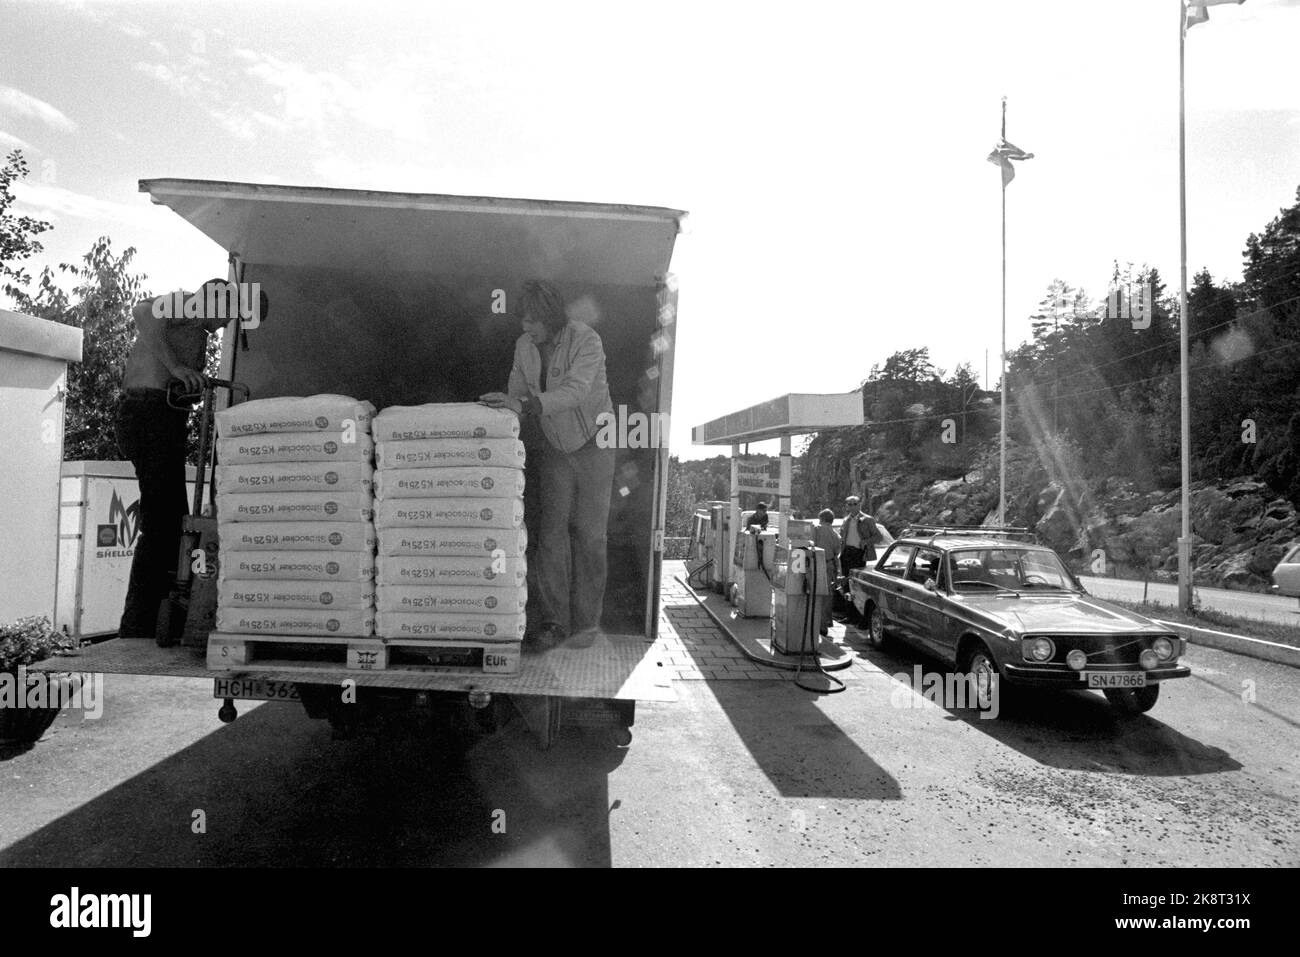 Svinesund, Sweden 19740810. Trade at the Swedish border. Norwegians buy cheap sugar and gasoline in Sweden, but from August 1, Norwegians only get home 5 kilos of sugar per day. The person has the Swedes decided. Before the scarce quota was introduced, the Swedes had lost over ten million subsidiary crowns on the sugar harbor. Motorists are still allowed to buy less expensive gasoline. The sugar was sold at the gas stations along with gasoline and motorists had to wait for hours to be dispatched. Here Norwegians at the gas station at the Swedish border. Photo: Sverre Børretzen Current / NTB Stock Photo